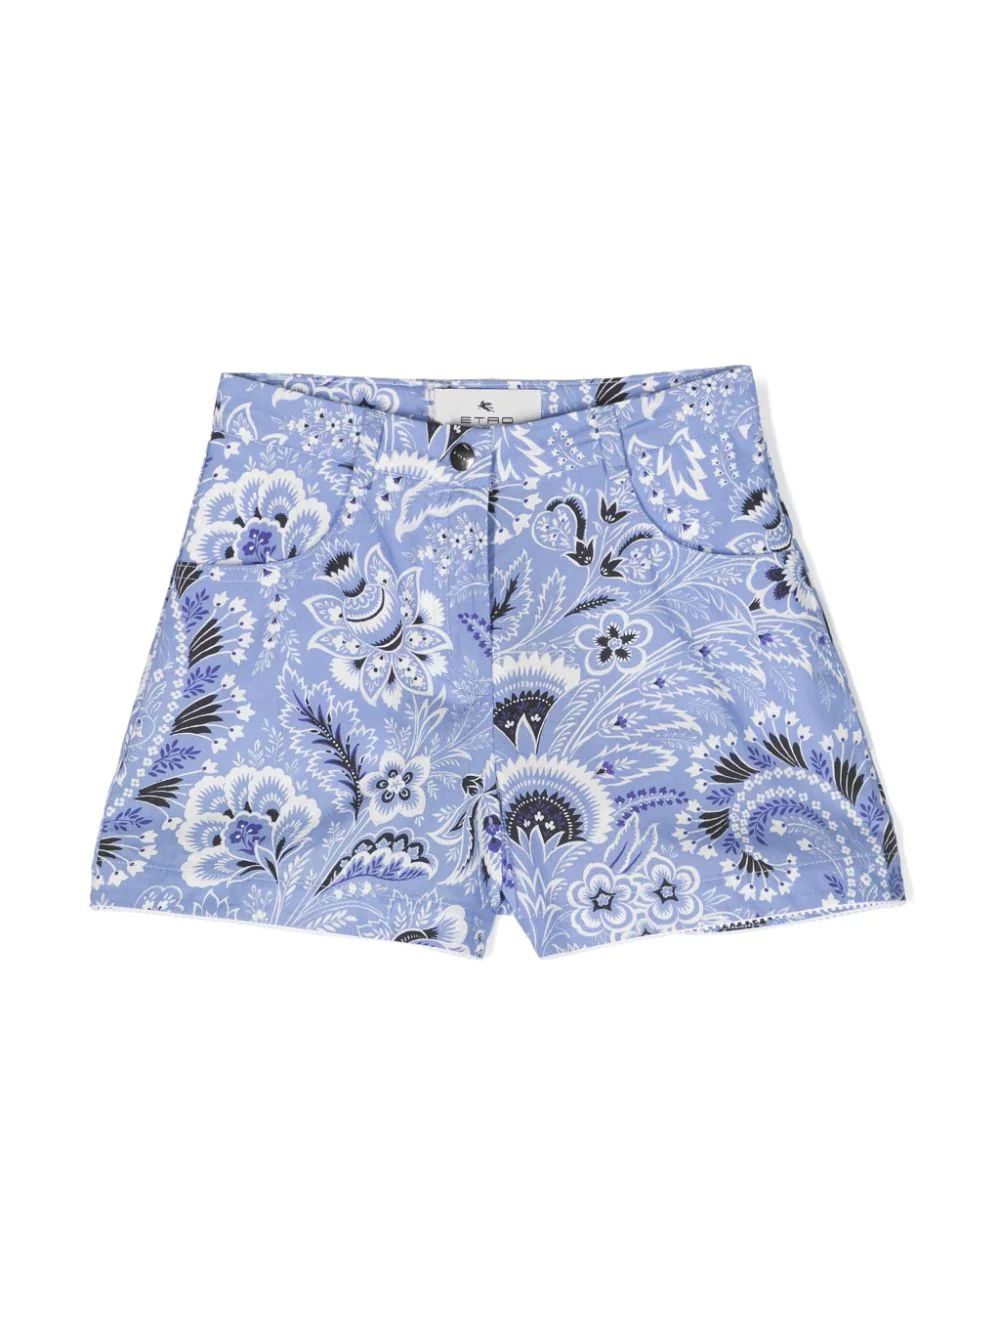 The DetailsETRO KIDSpaisley-print cotton shortsMade in ItalyHighlightslight blue cotton paisley p... | Farfetch Global